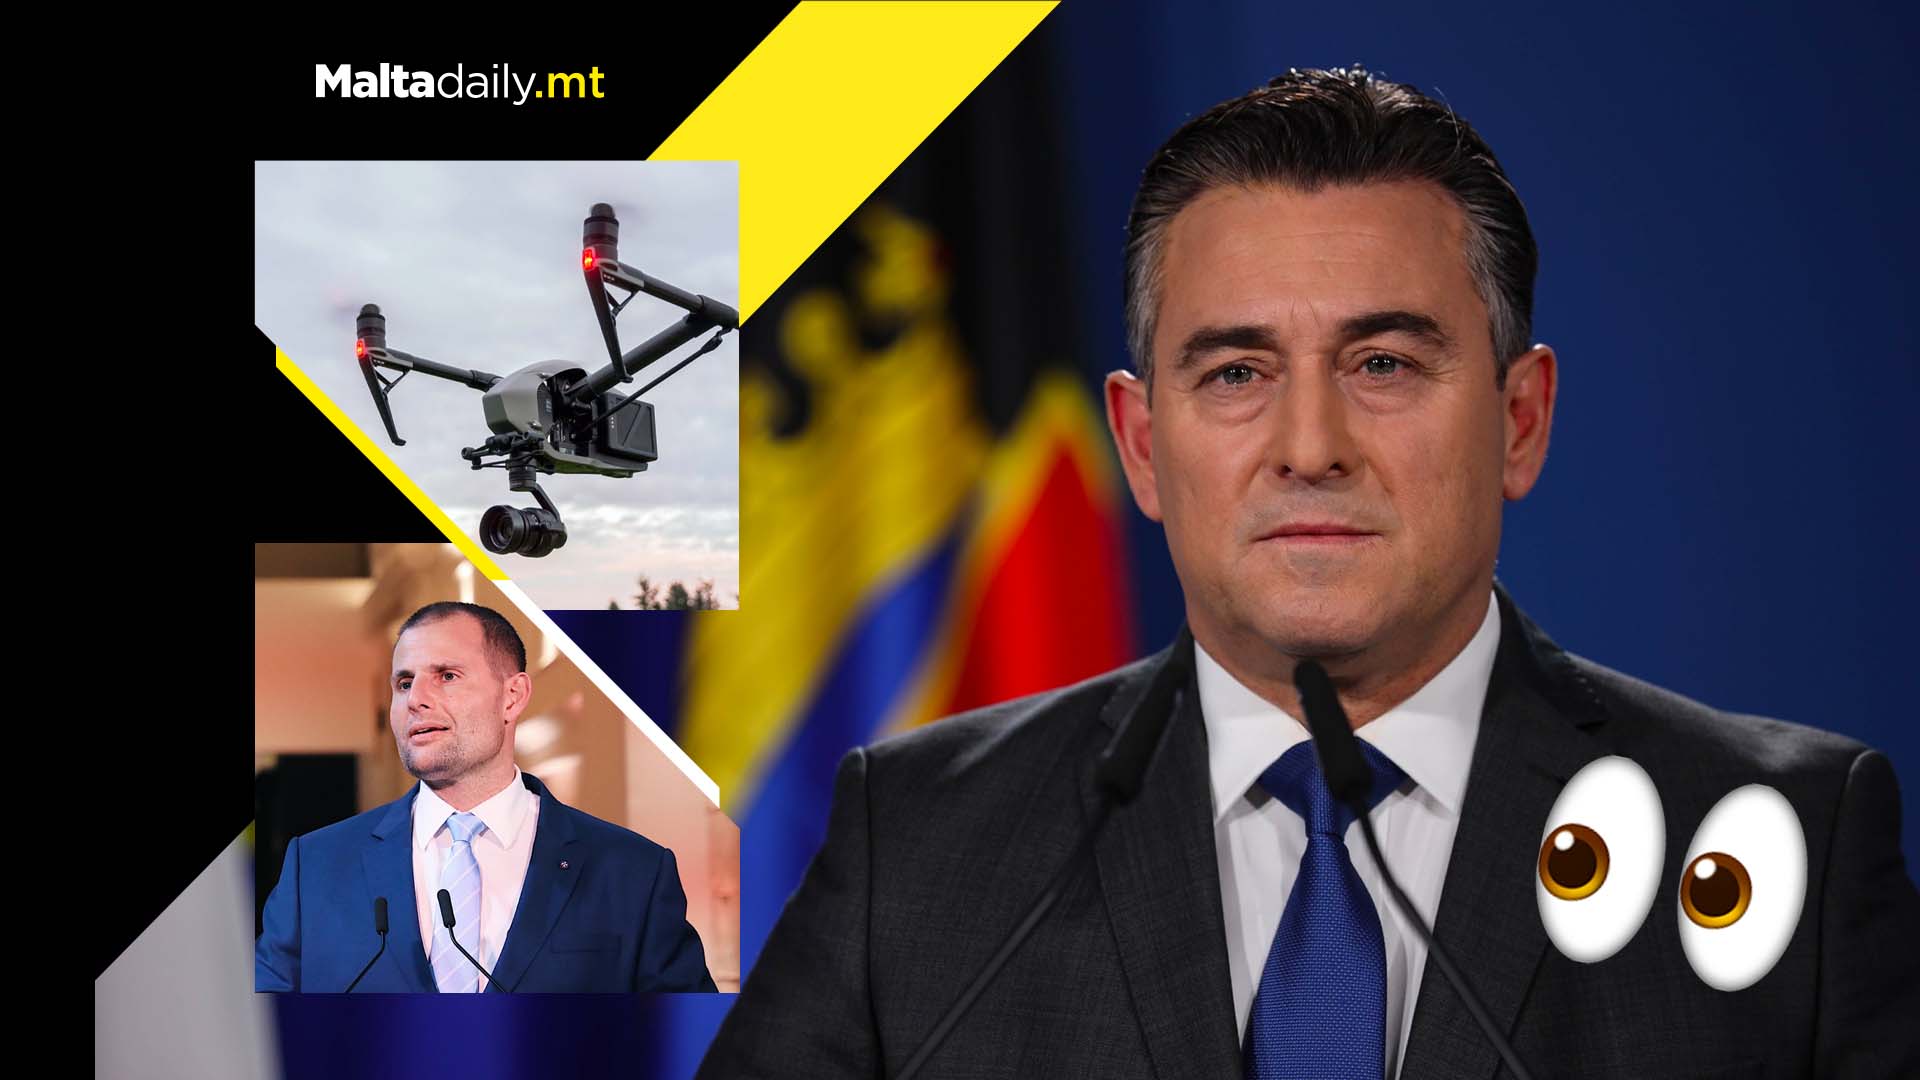 Bernard Grech claims a drone was sent by Robert Abela to film his house